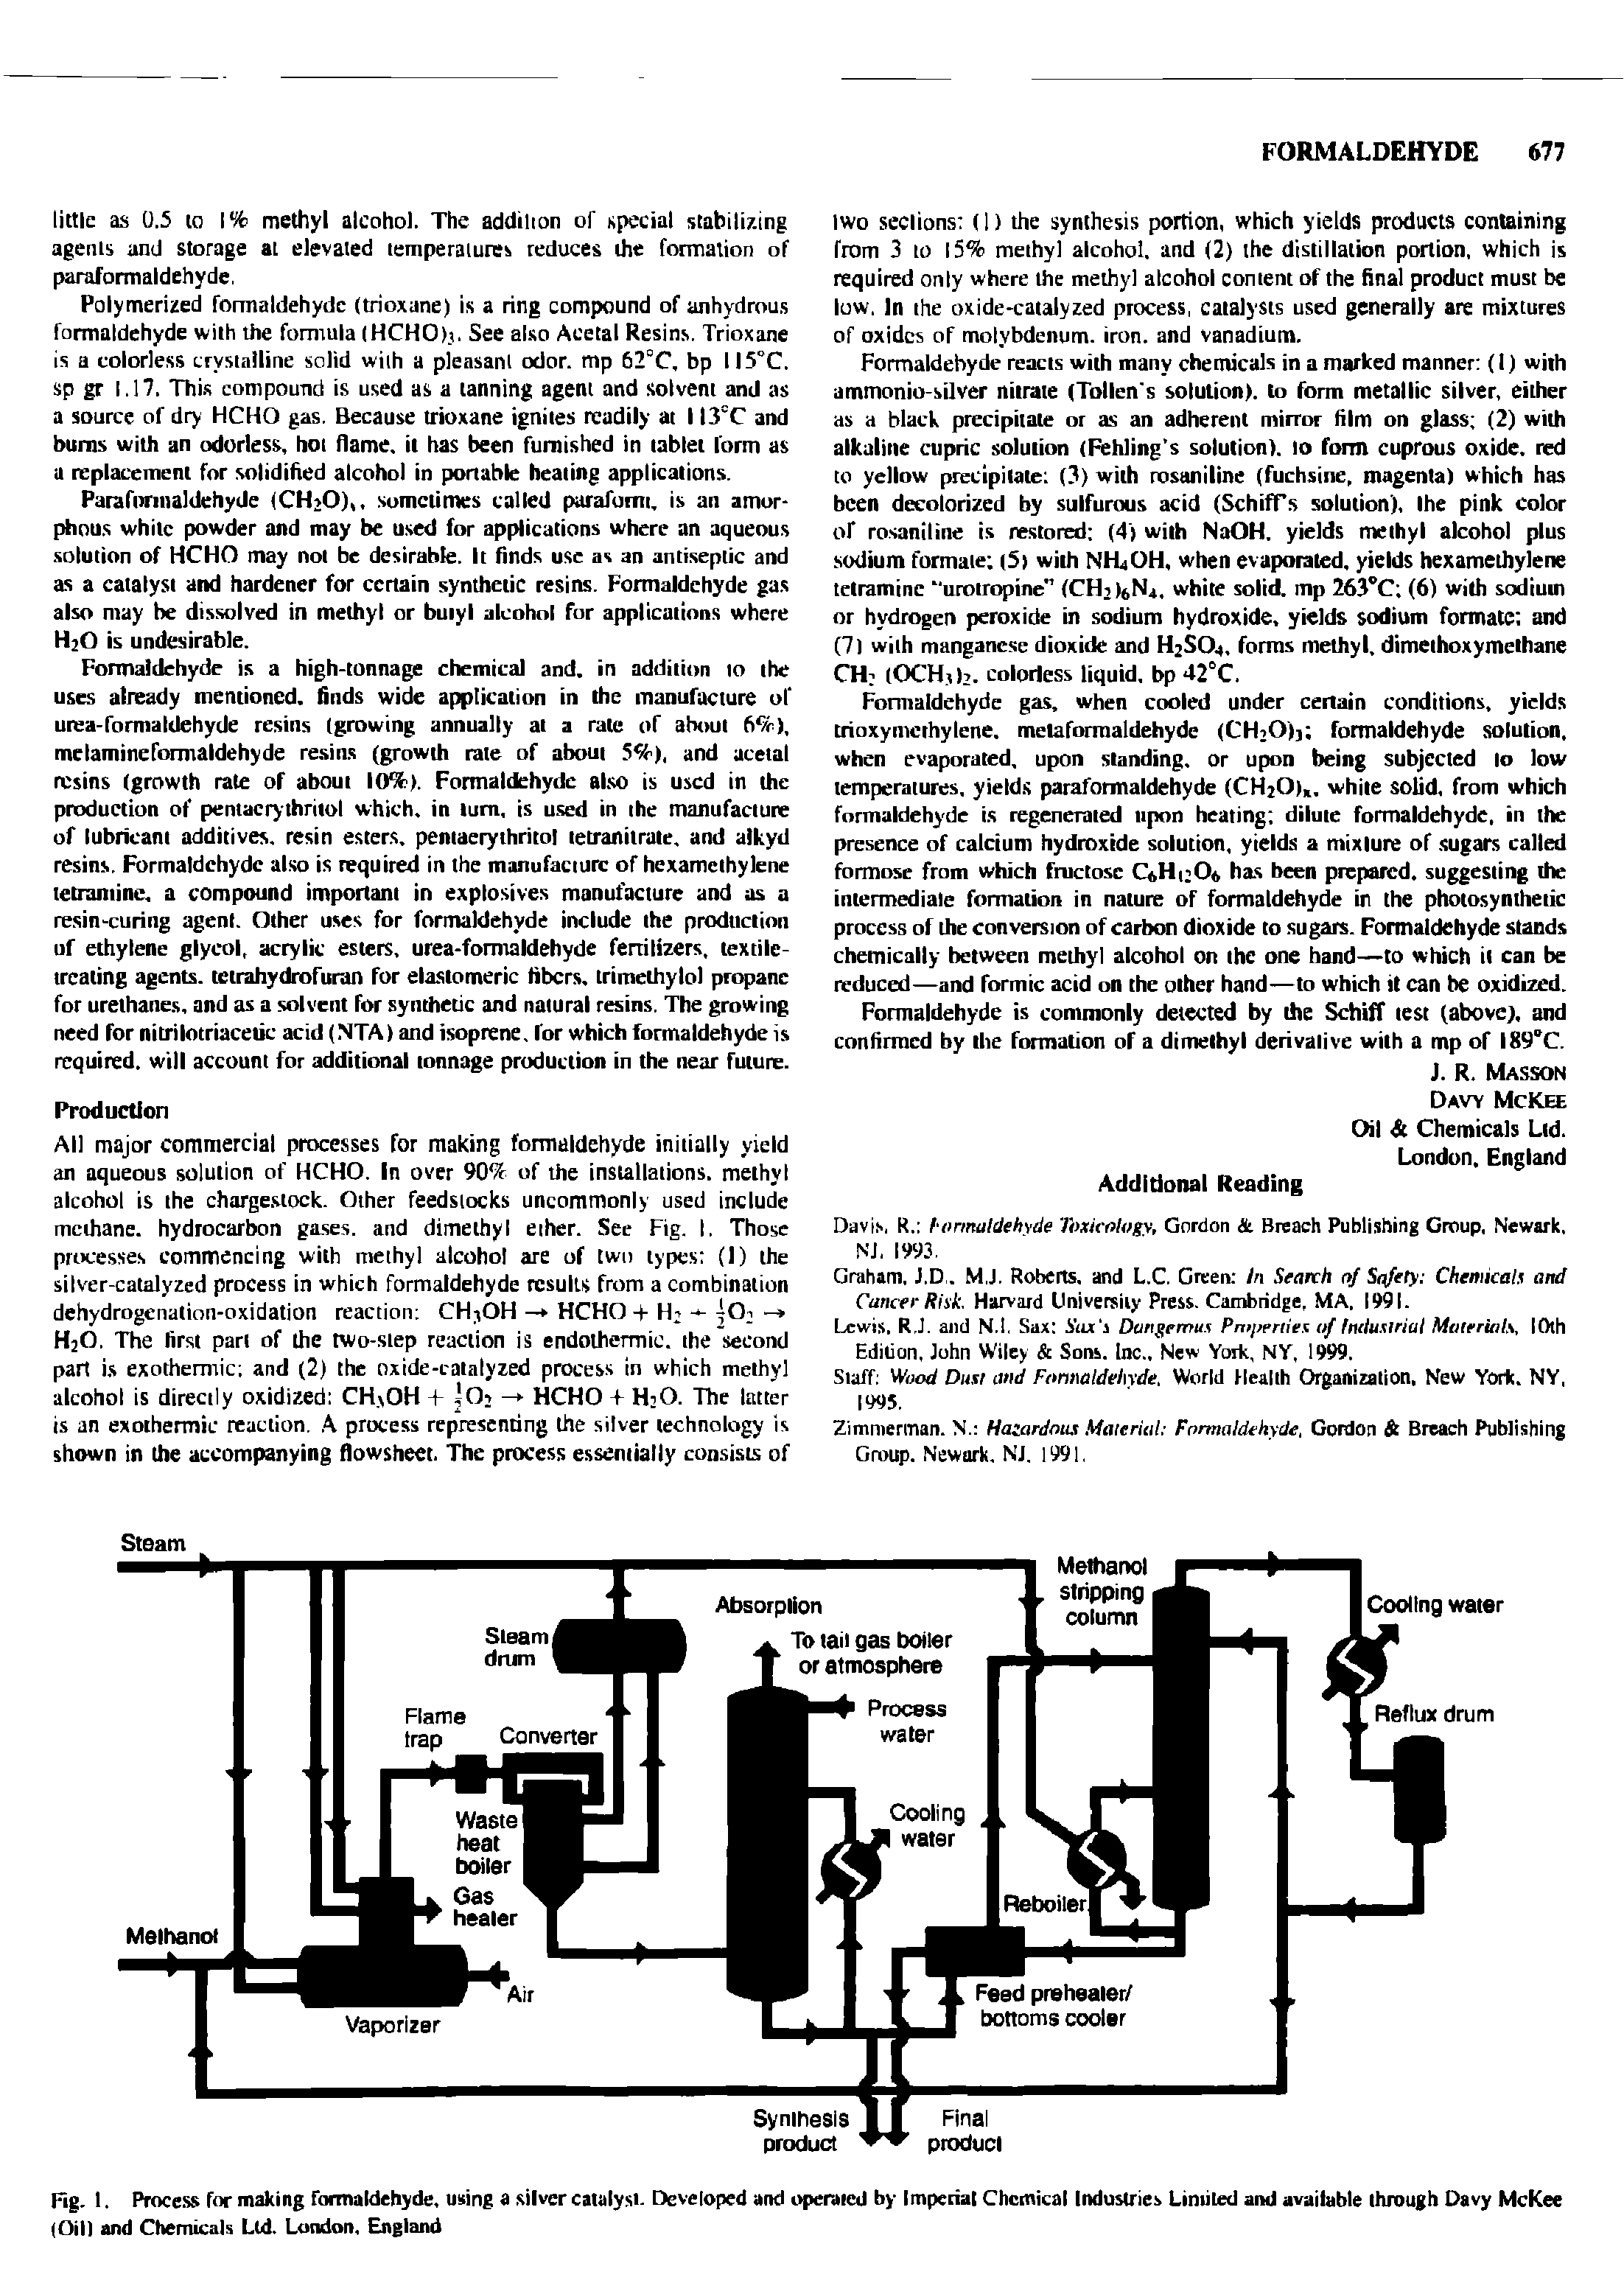 Fig. 1. Process for making formaldehyde, using a silver catalyst- Developed and operated by Imperial Chemical Industries Limited and available through Davy McKee (Oil) and Chemicals Ltd. London. England...